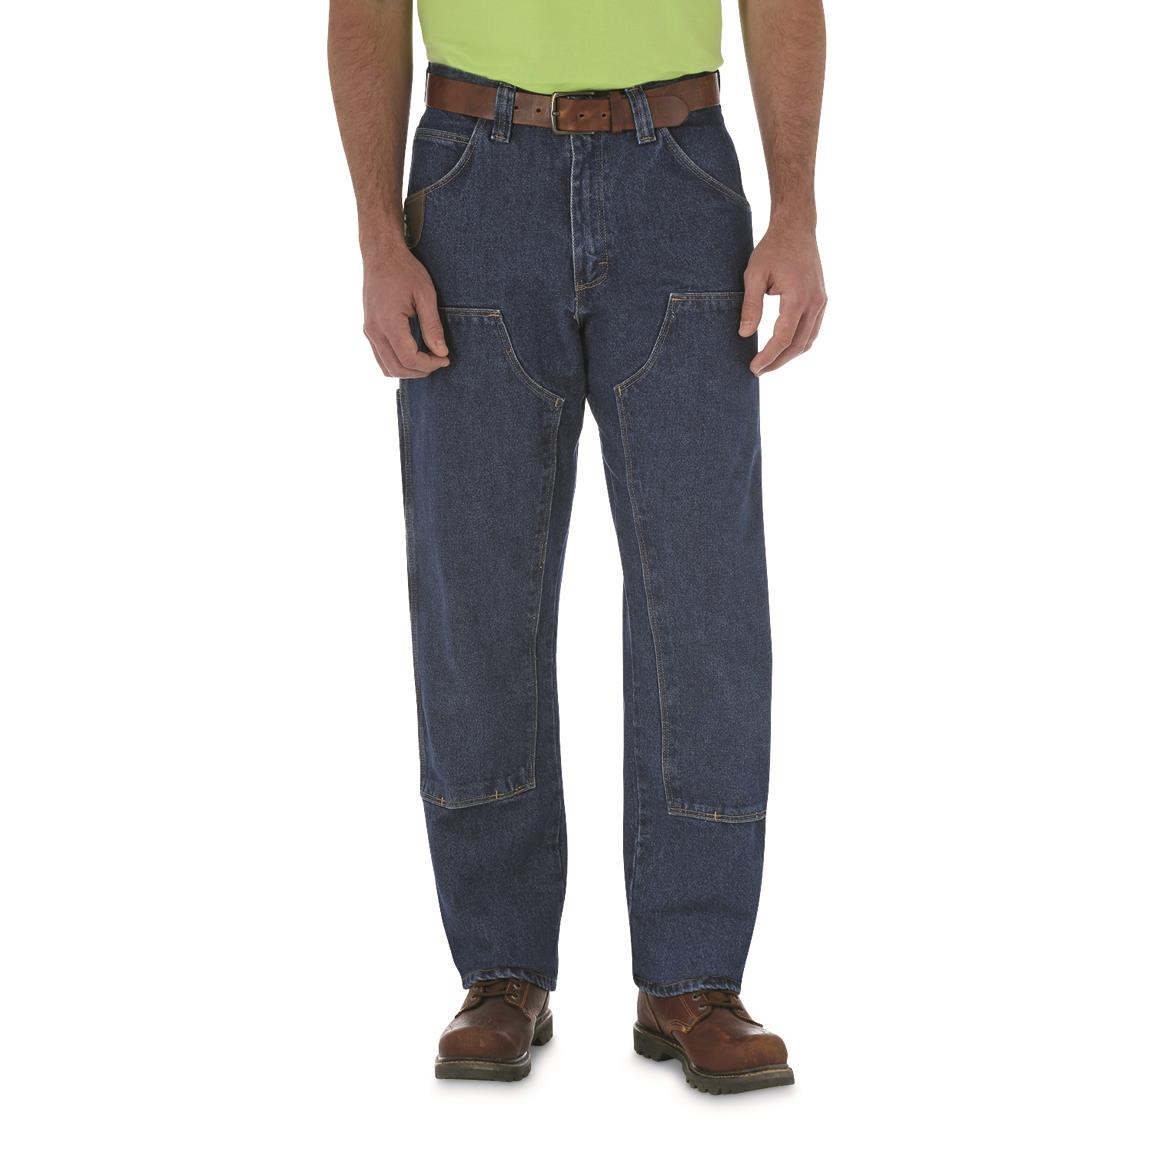 Wrangler RIGGS Workwear Men's Utility Jeans - 226724, Jeans & Pants at ...